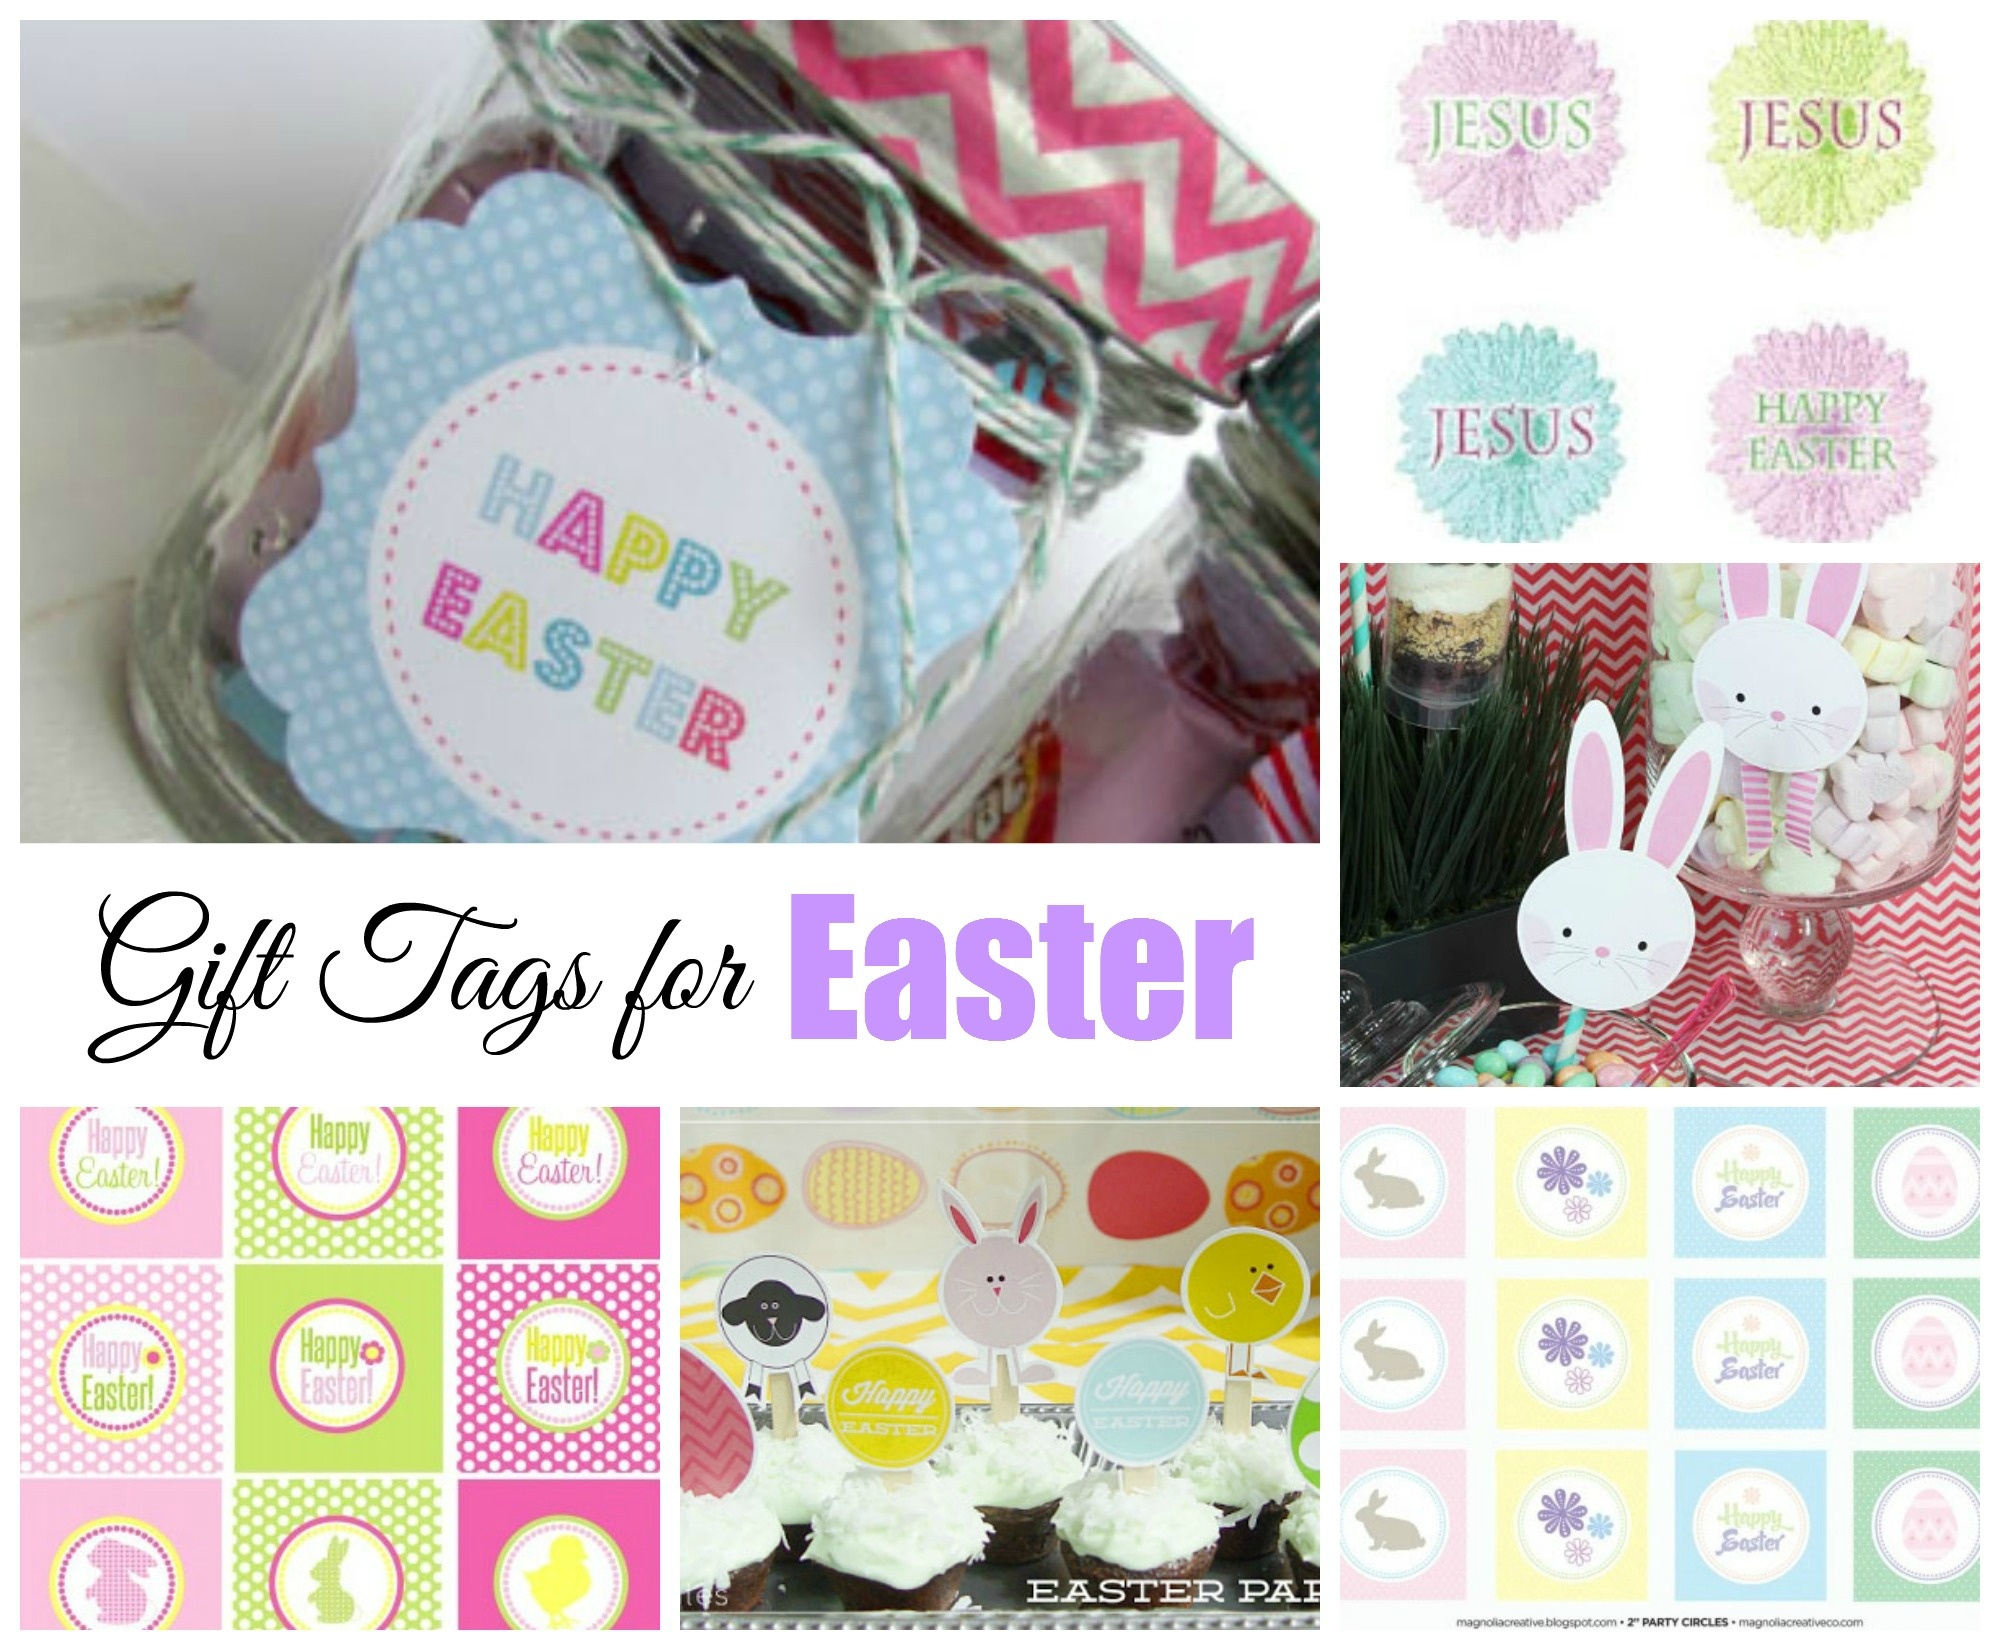 Easter Free Printable Gift Tags | Celebrating Holidays - Party Favor Tags Free Printable